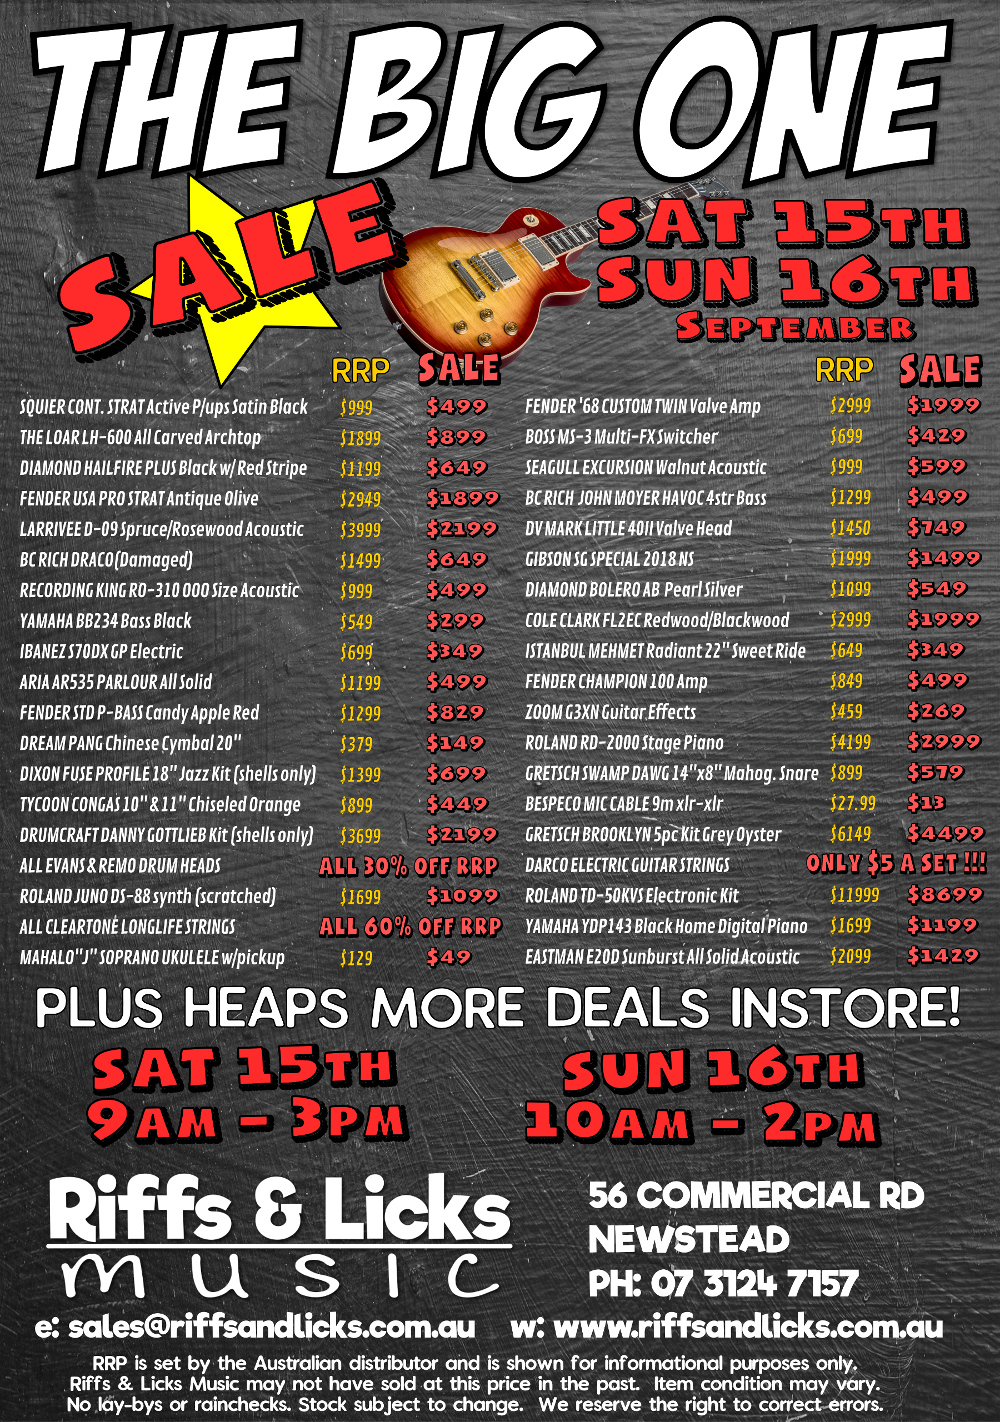 The Big One Sale September 15th & 16th